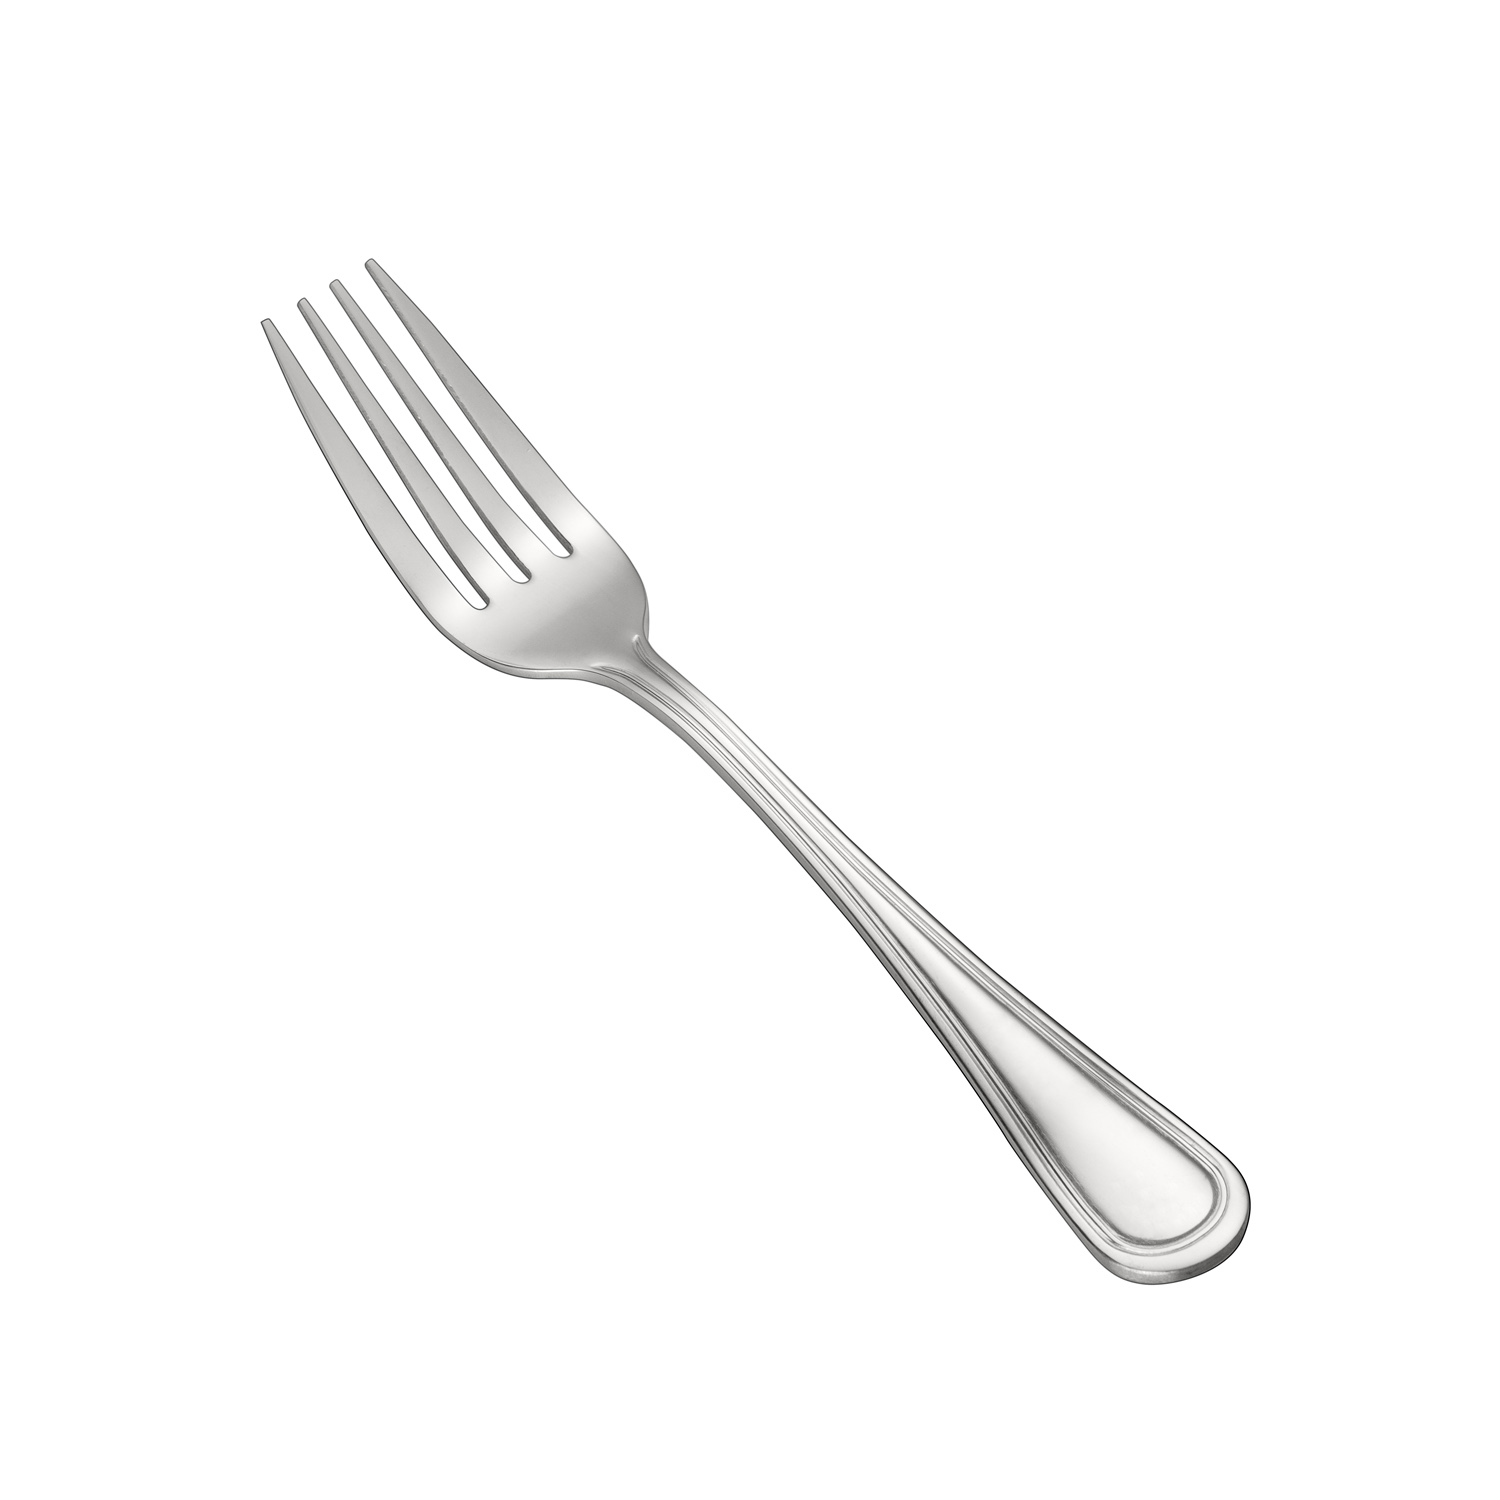 CAC China 3002-06 Prime Salad Fork, Extra Heavyweight 18/0, 7"